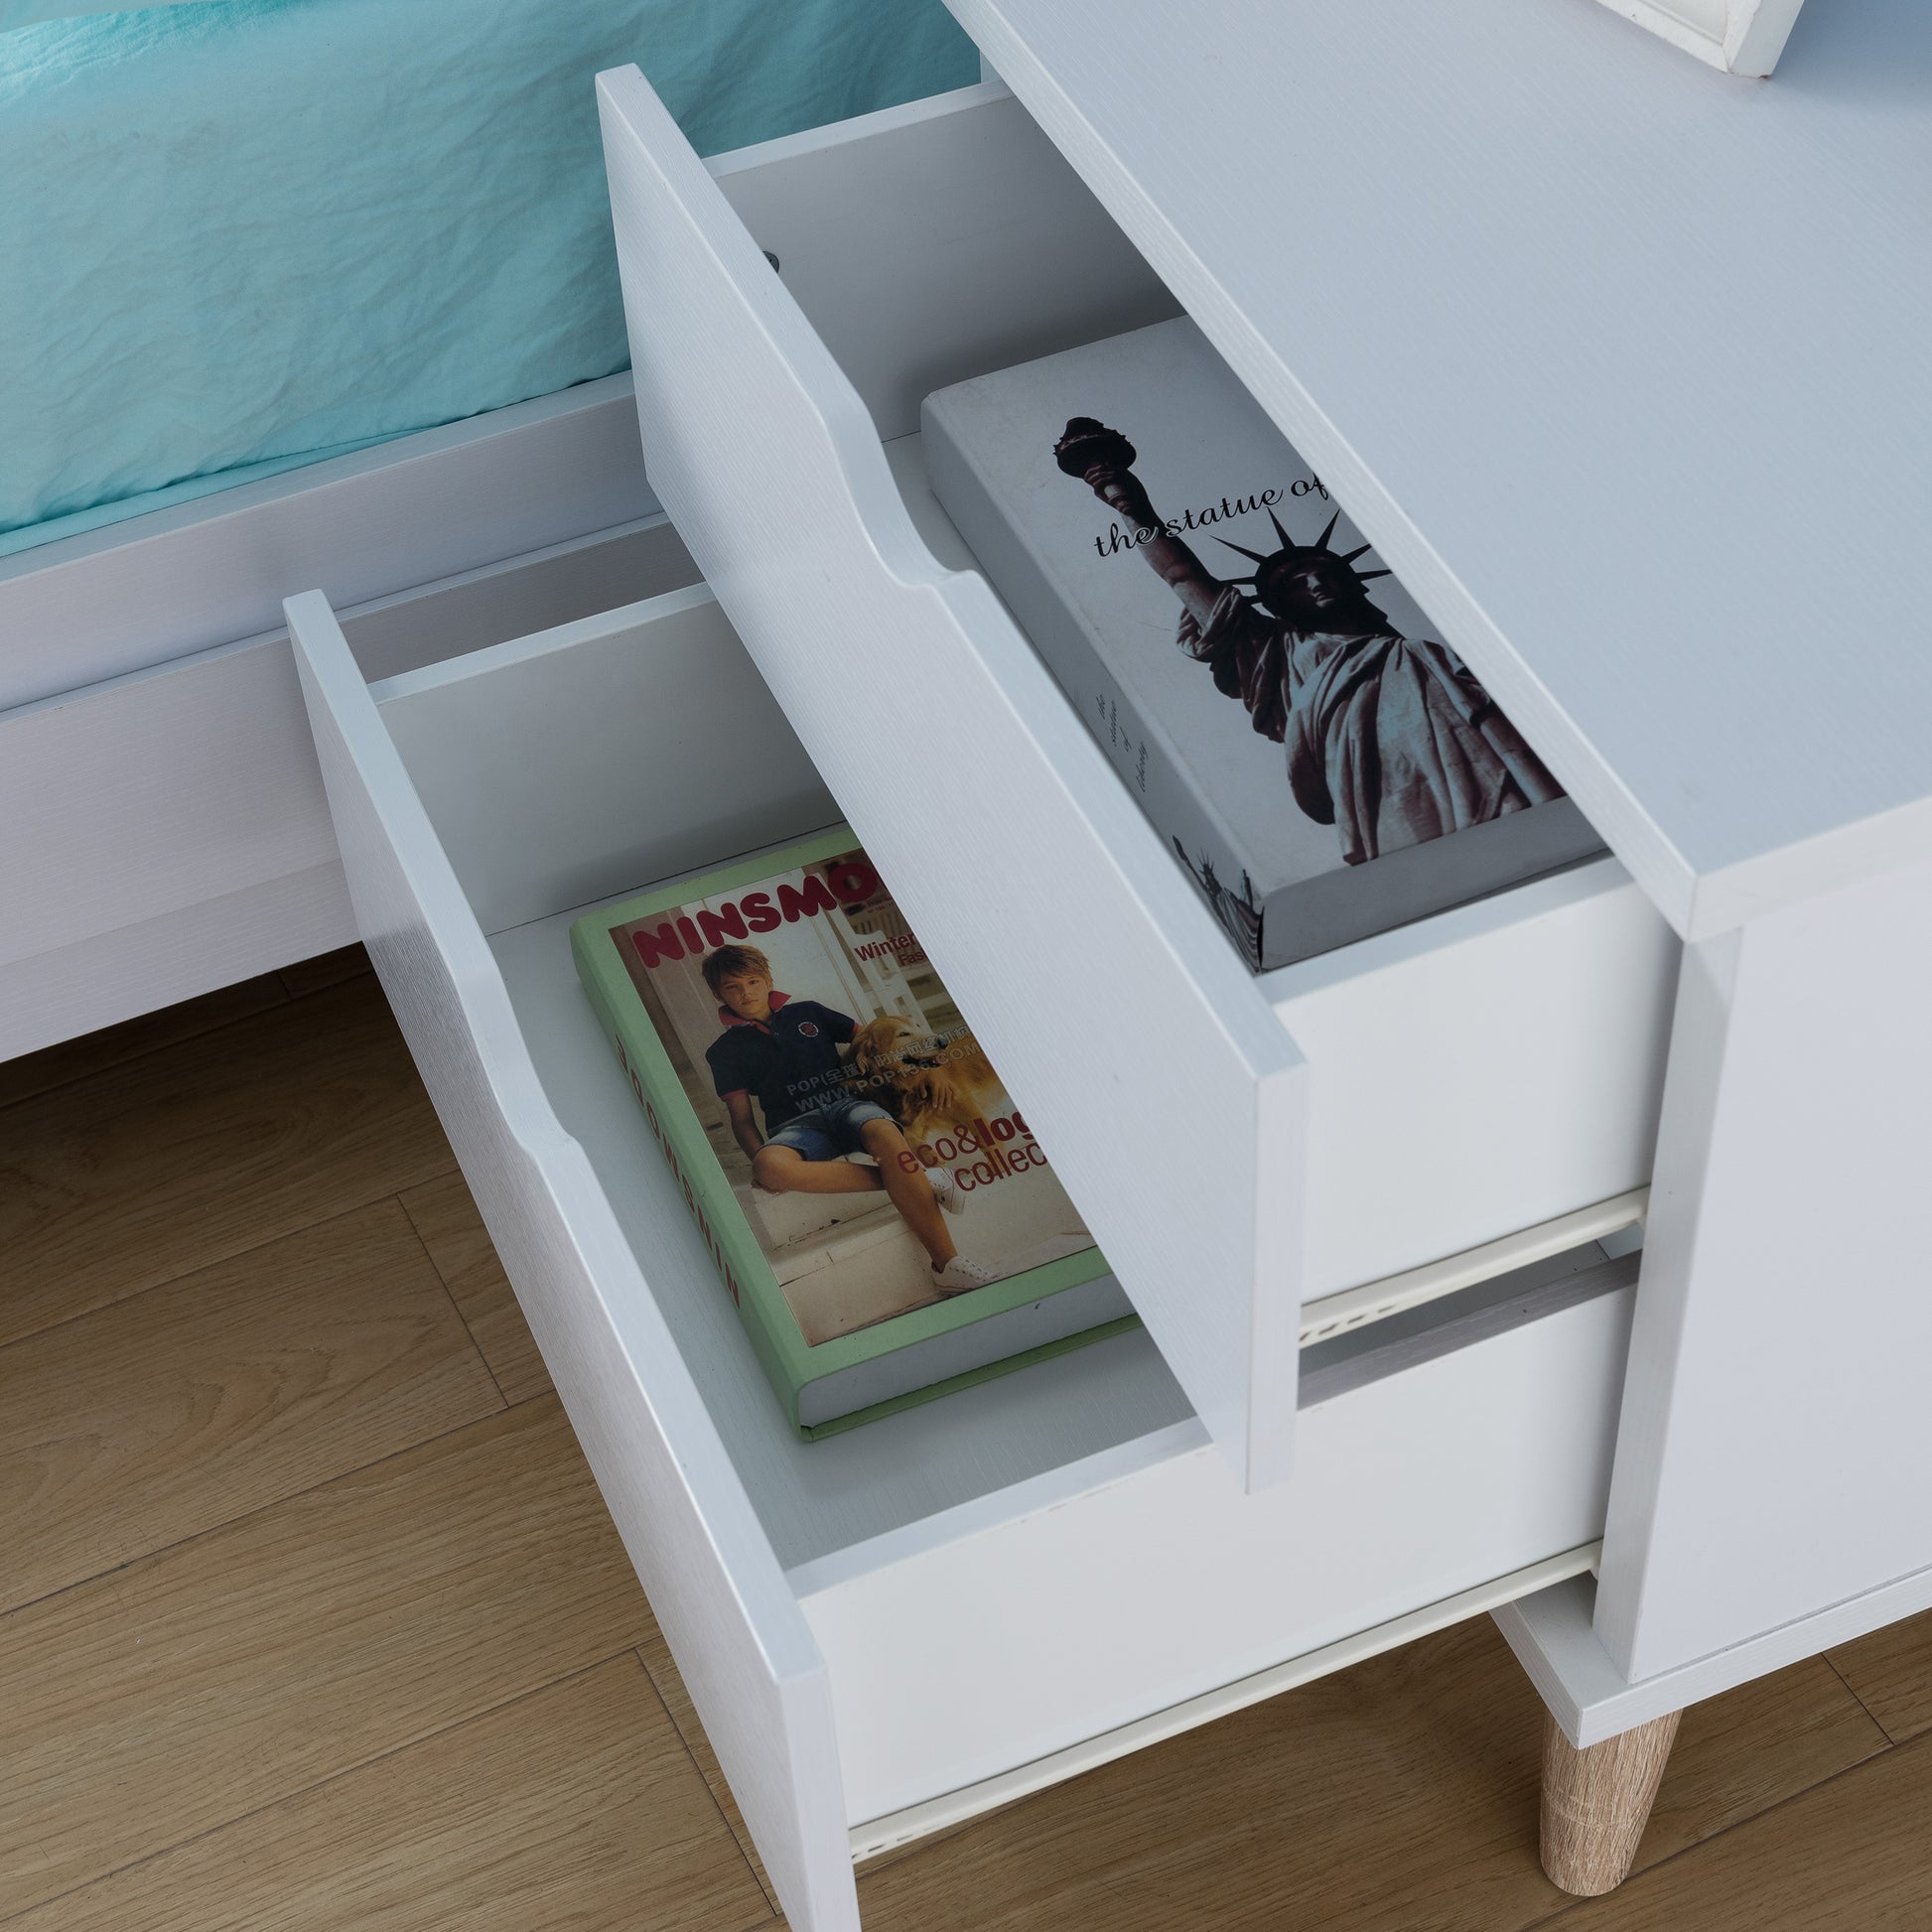 Left angled bird's eye view of a mid-century modern white two-drawer nightstand with drawers open in a bedroom with accessories